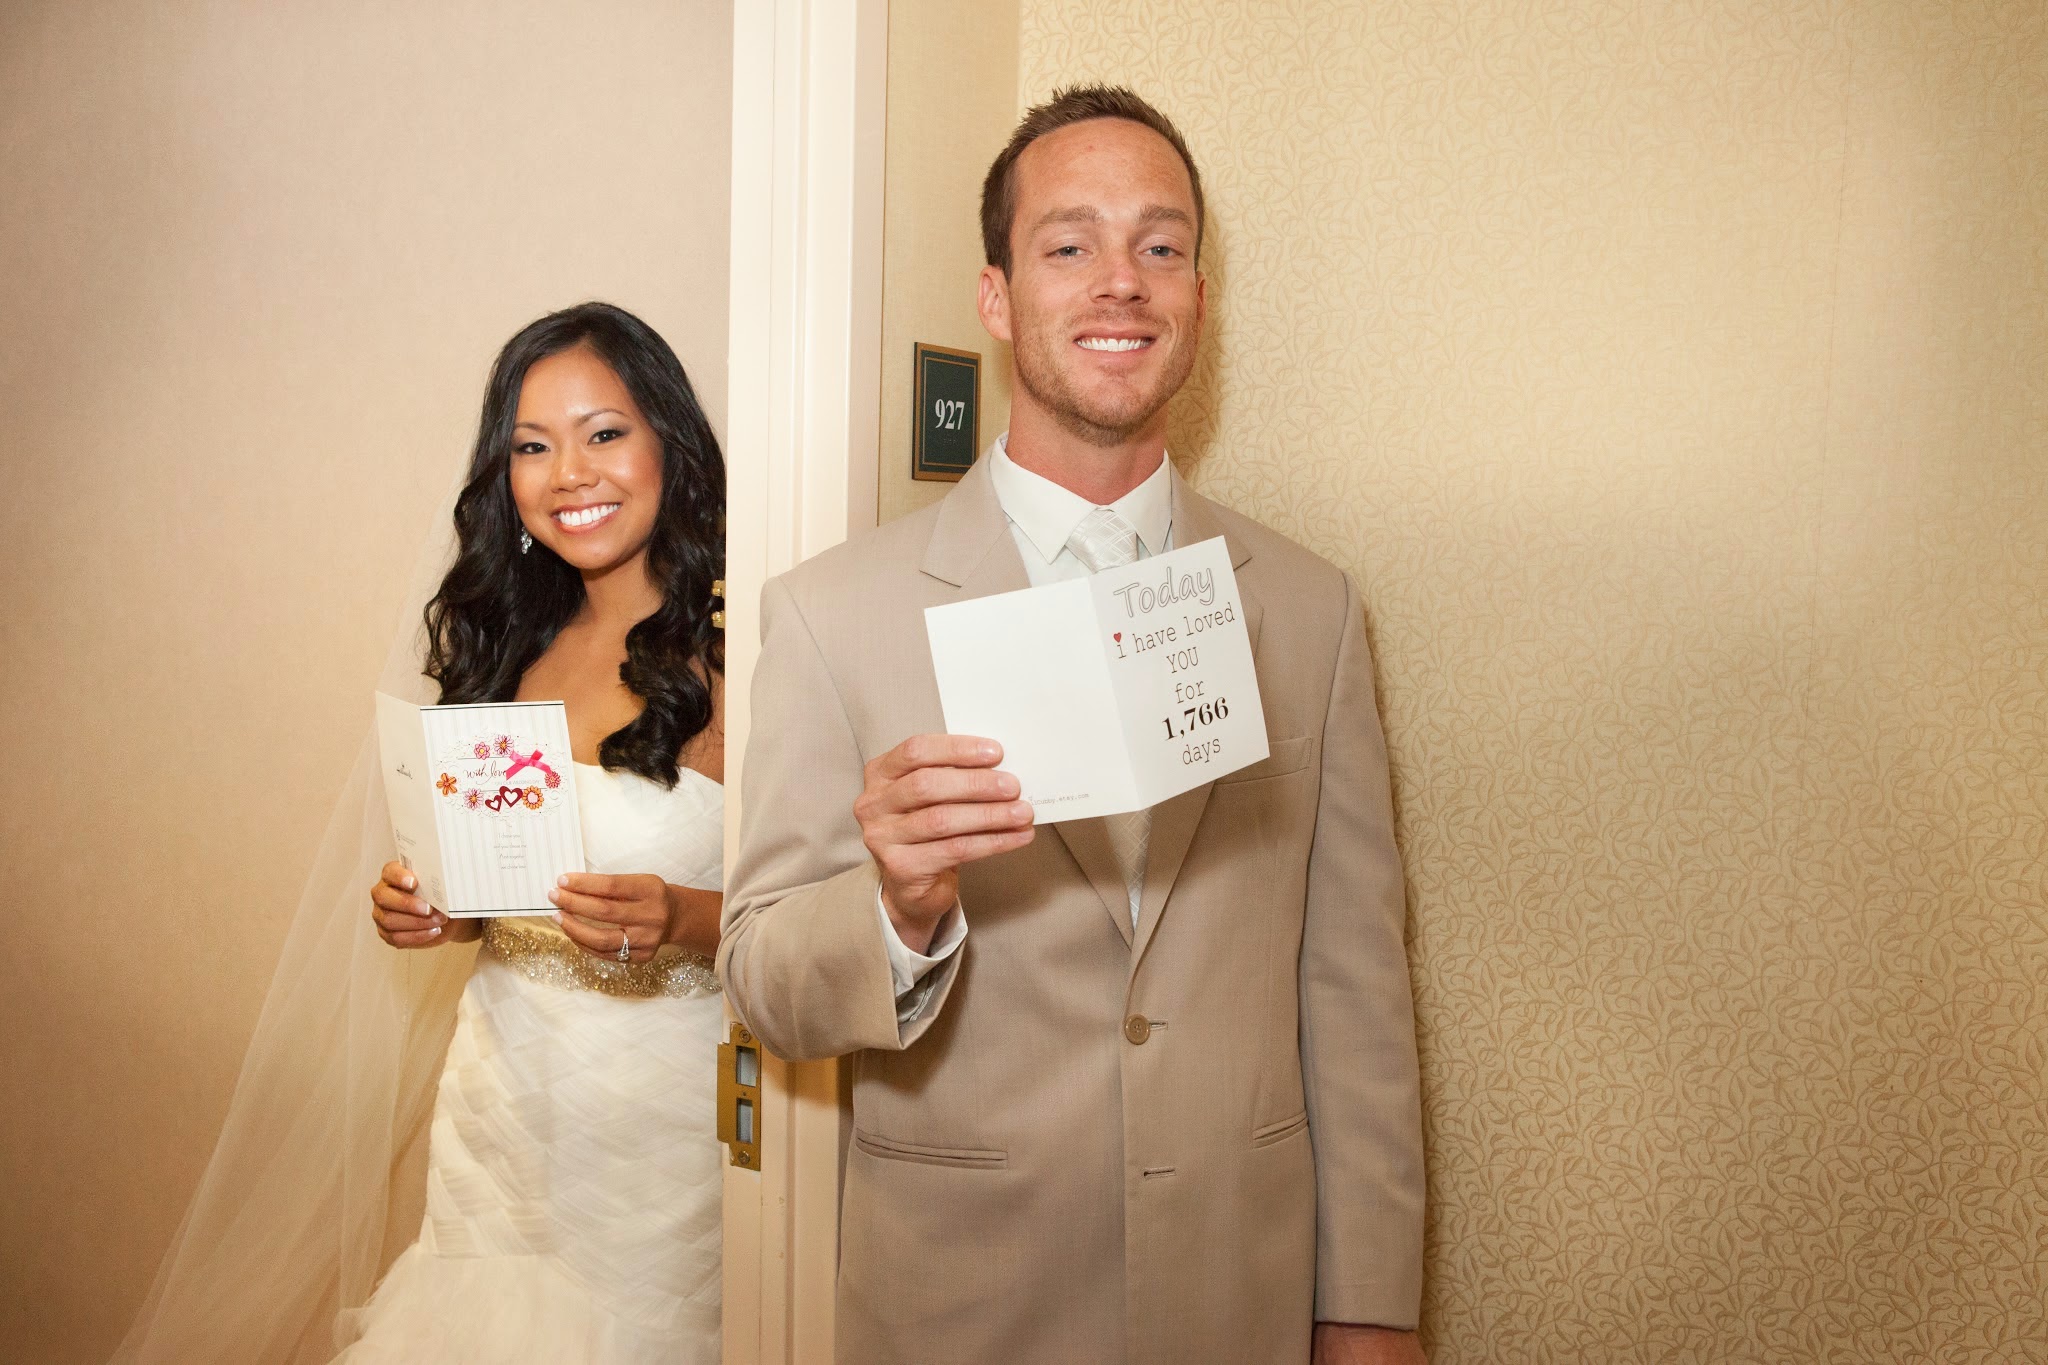 The bride and groom exchange love note before the ceremony